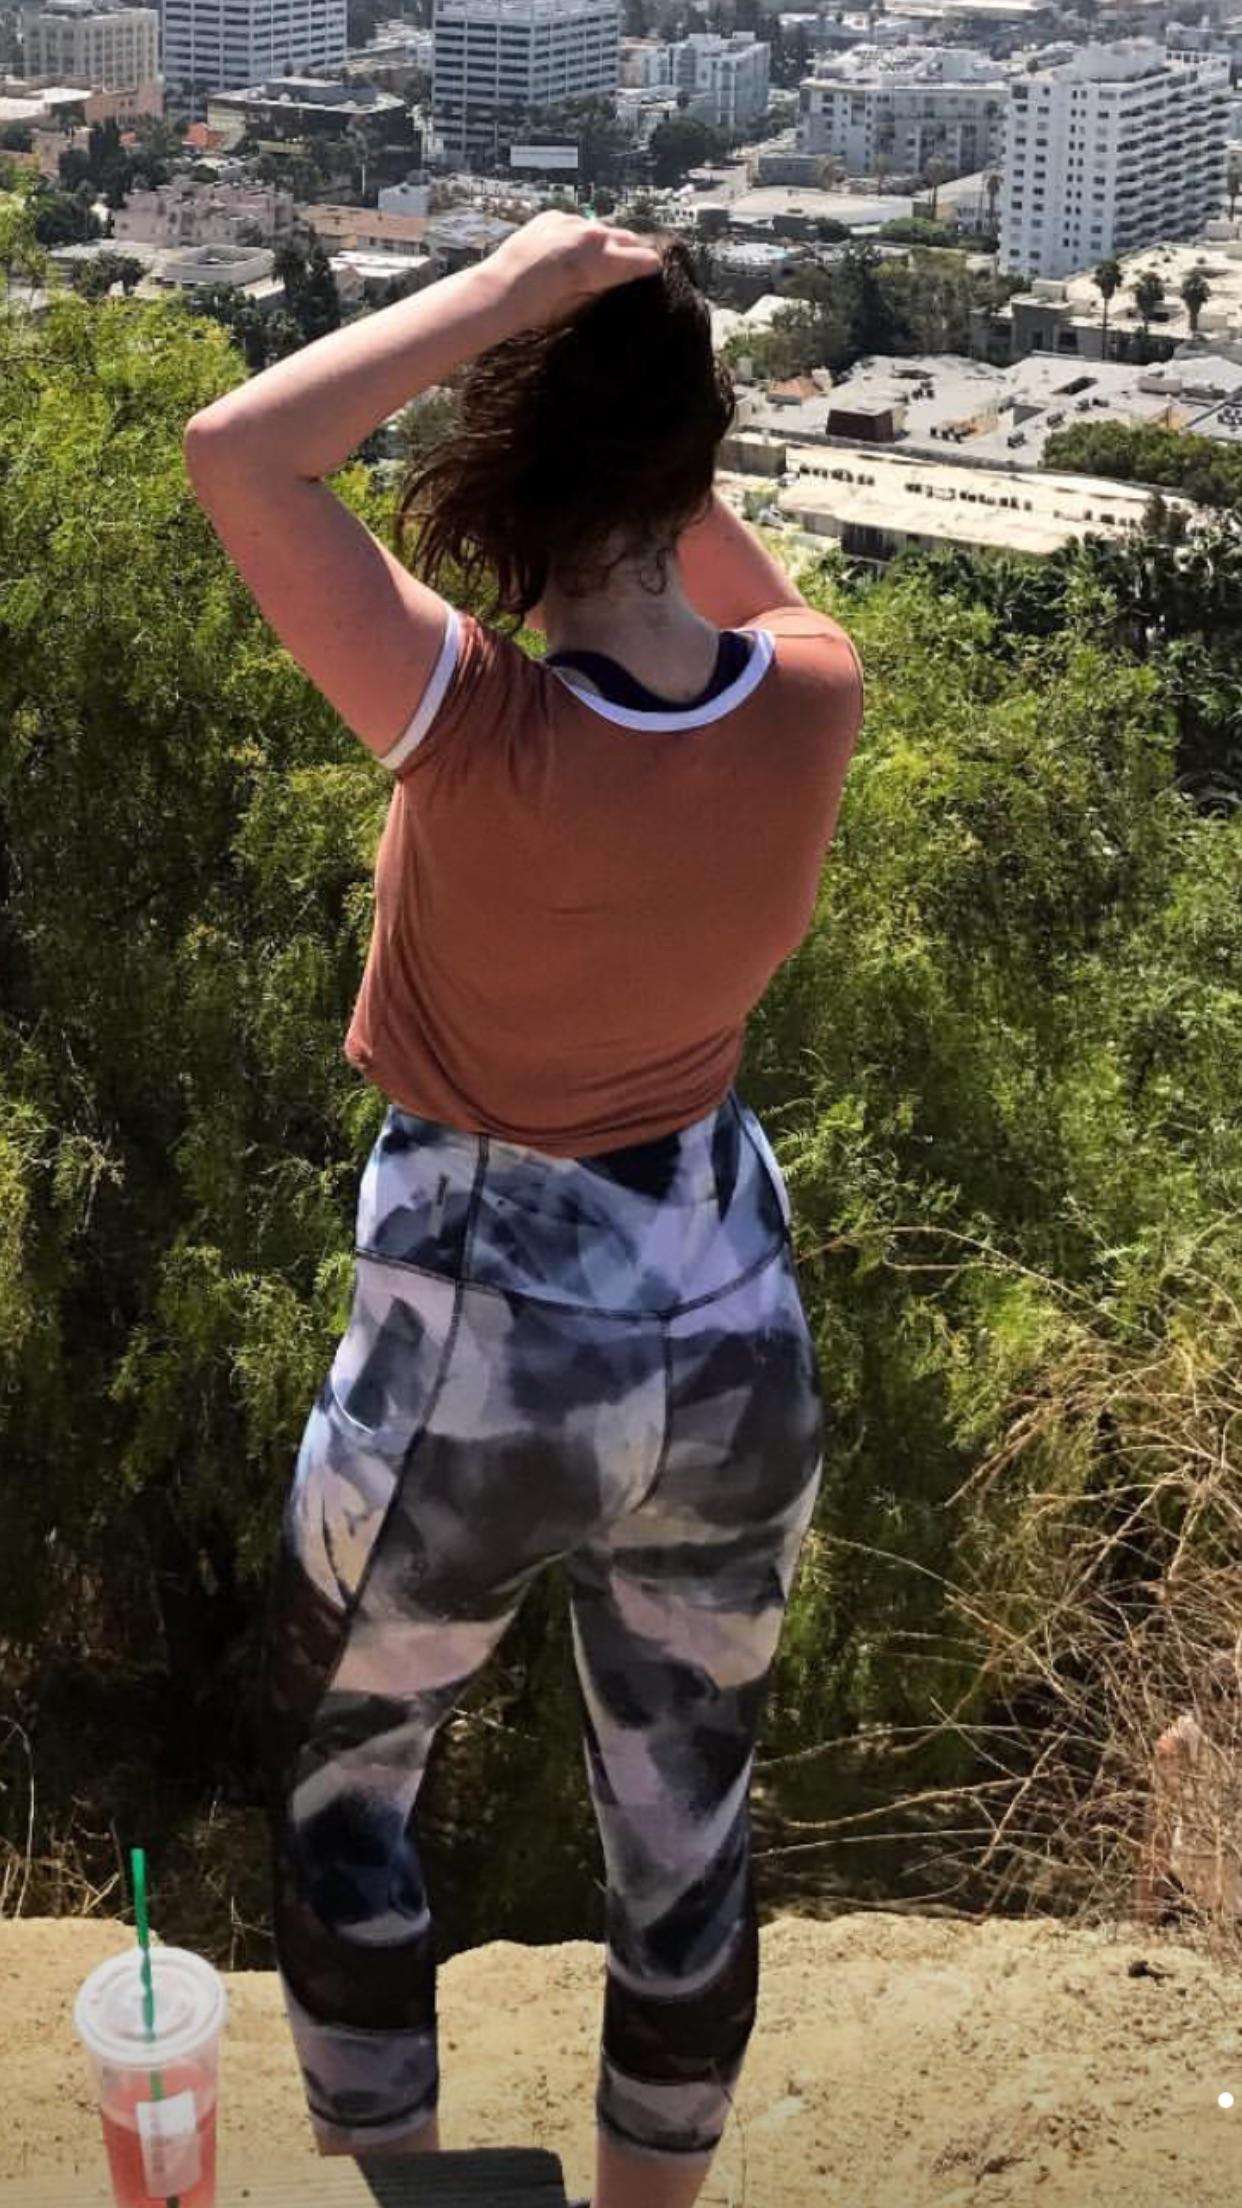 51 Hottest Emma Kenney Big Butt Pictures Are A Charm For Her Fans | Best Of Comic Books